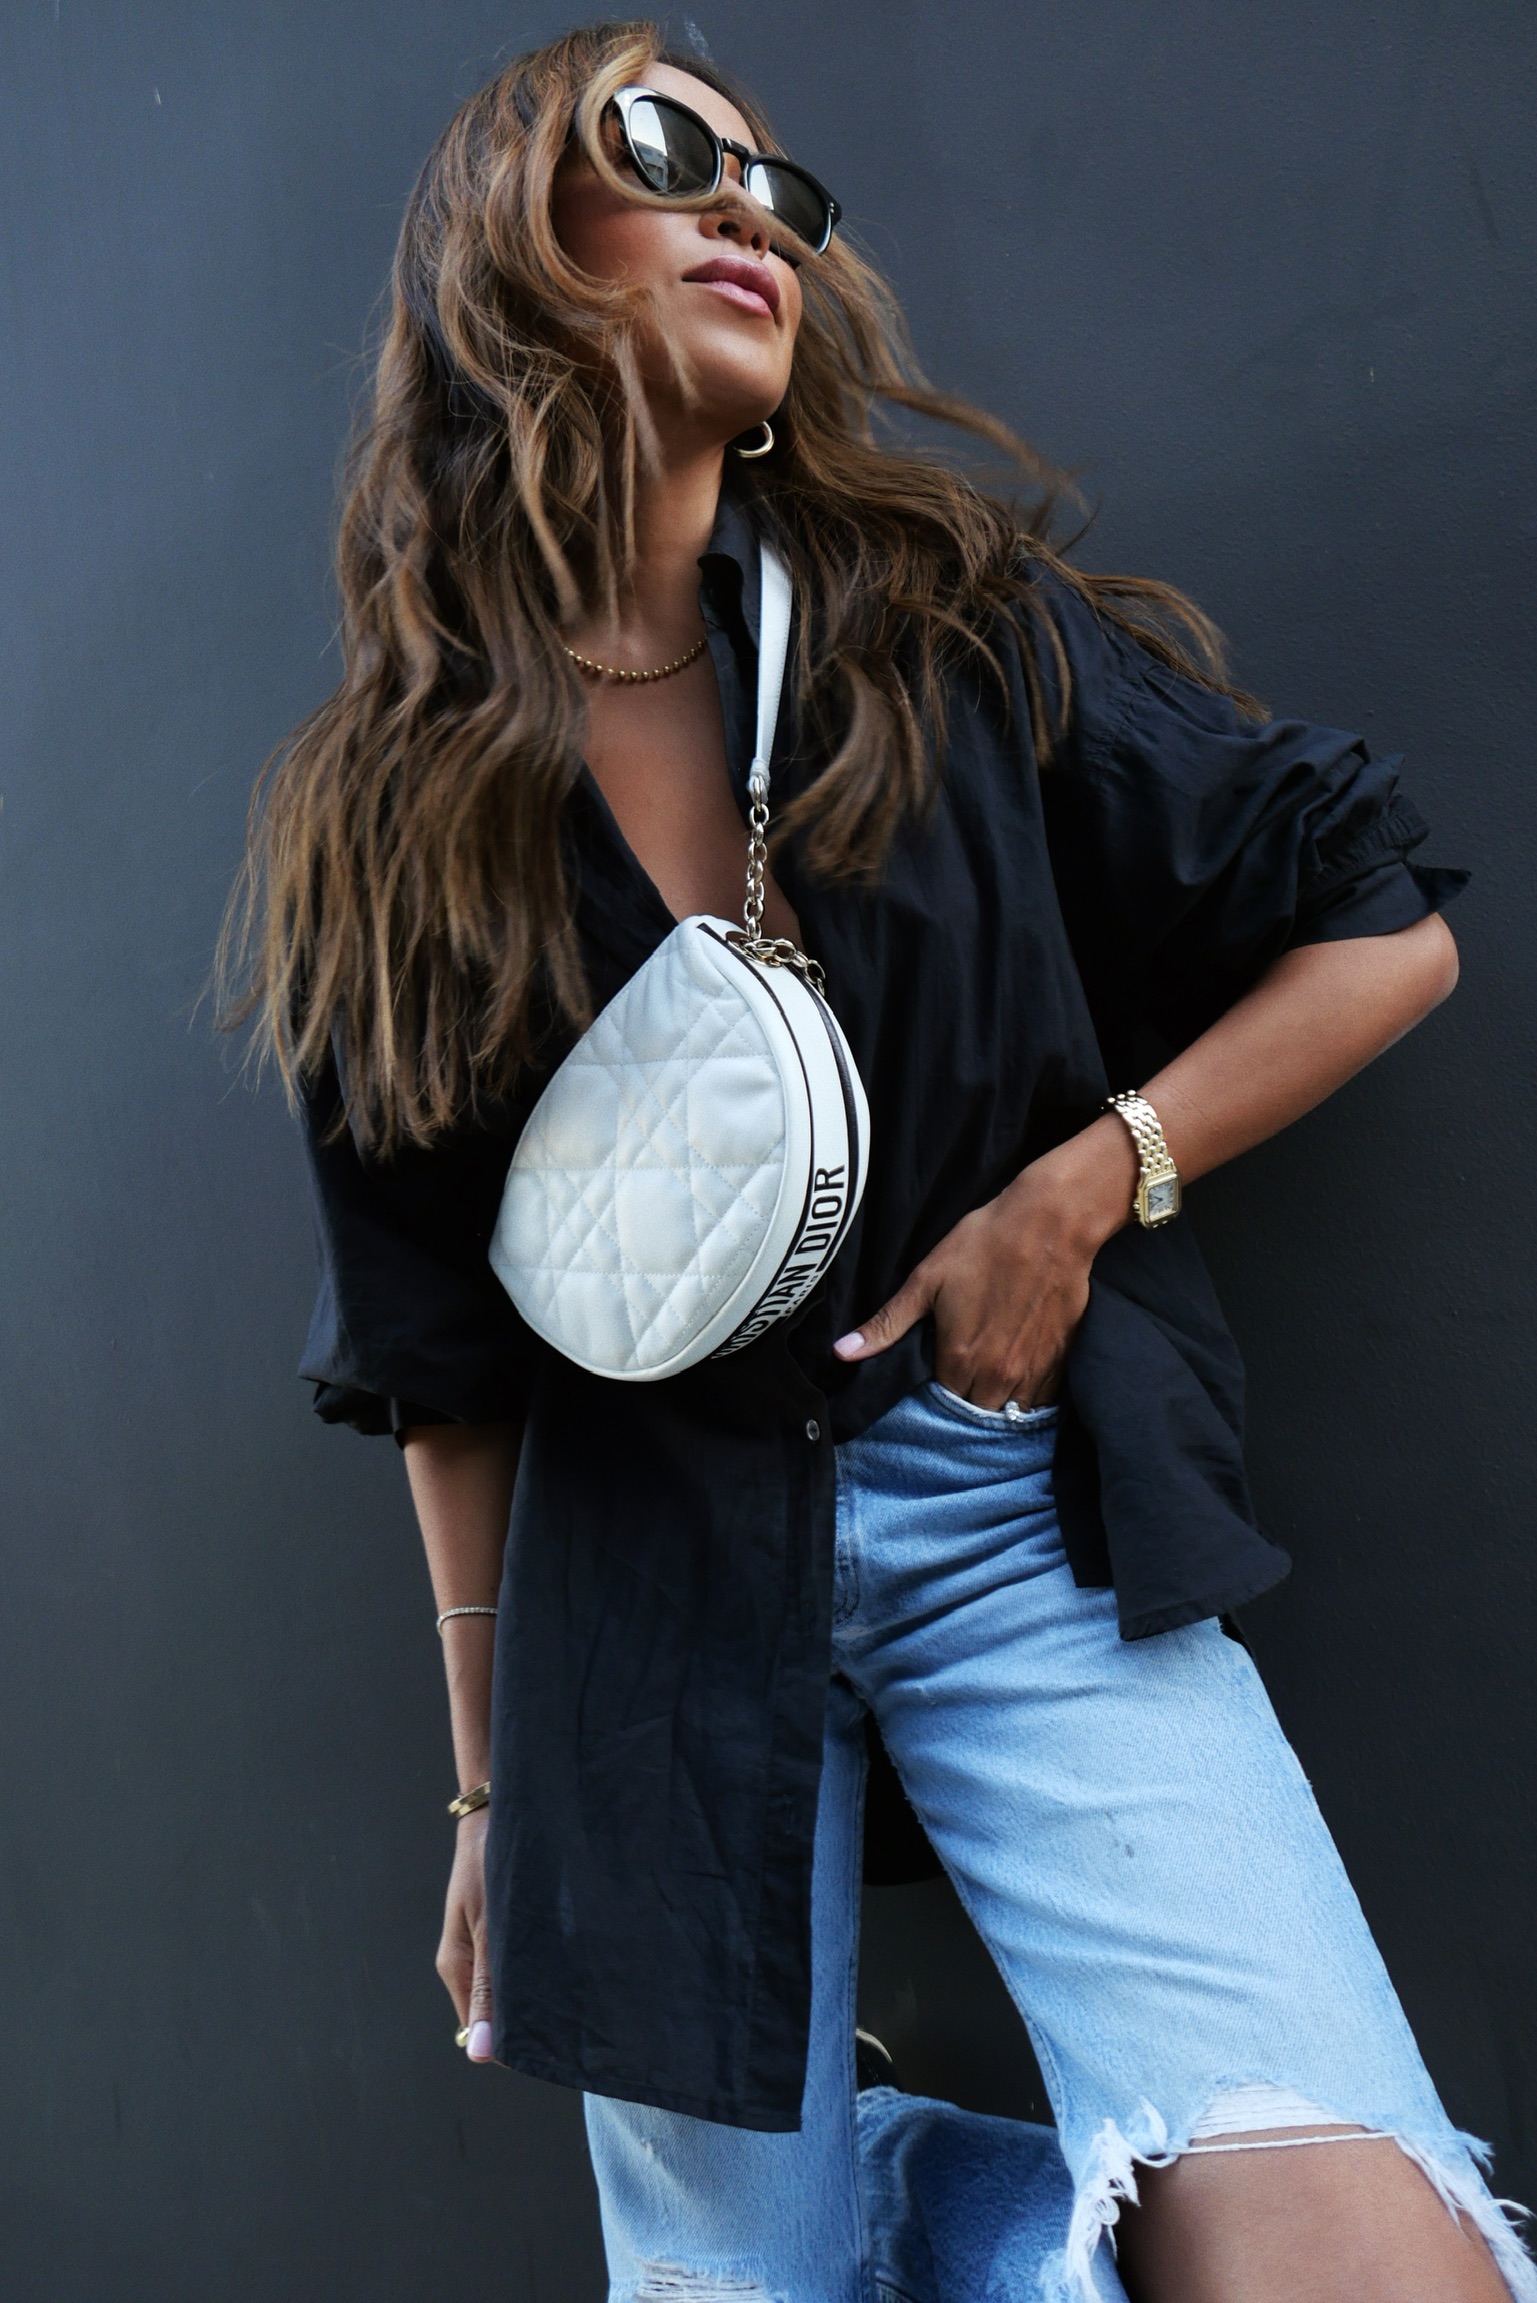 Wardrobe essential: oversized button-down! – Sincerely Jules